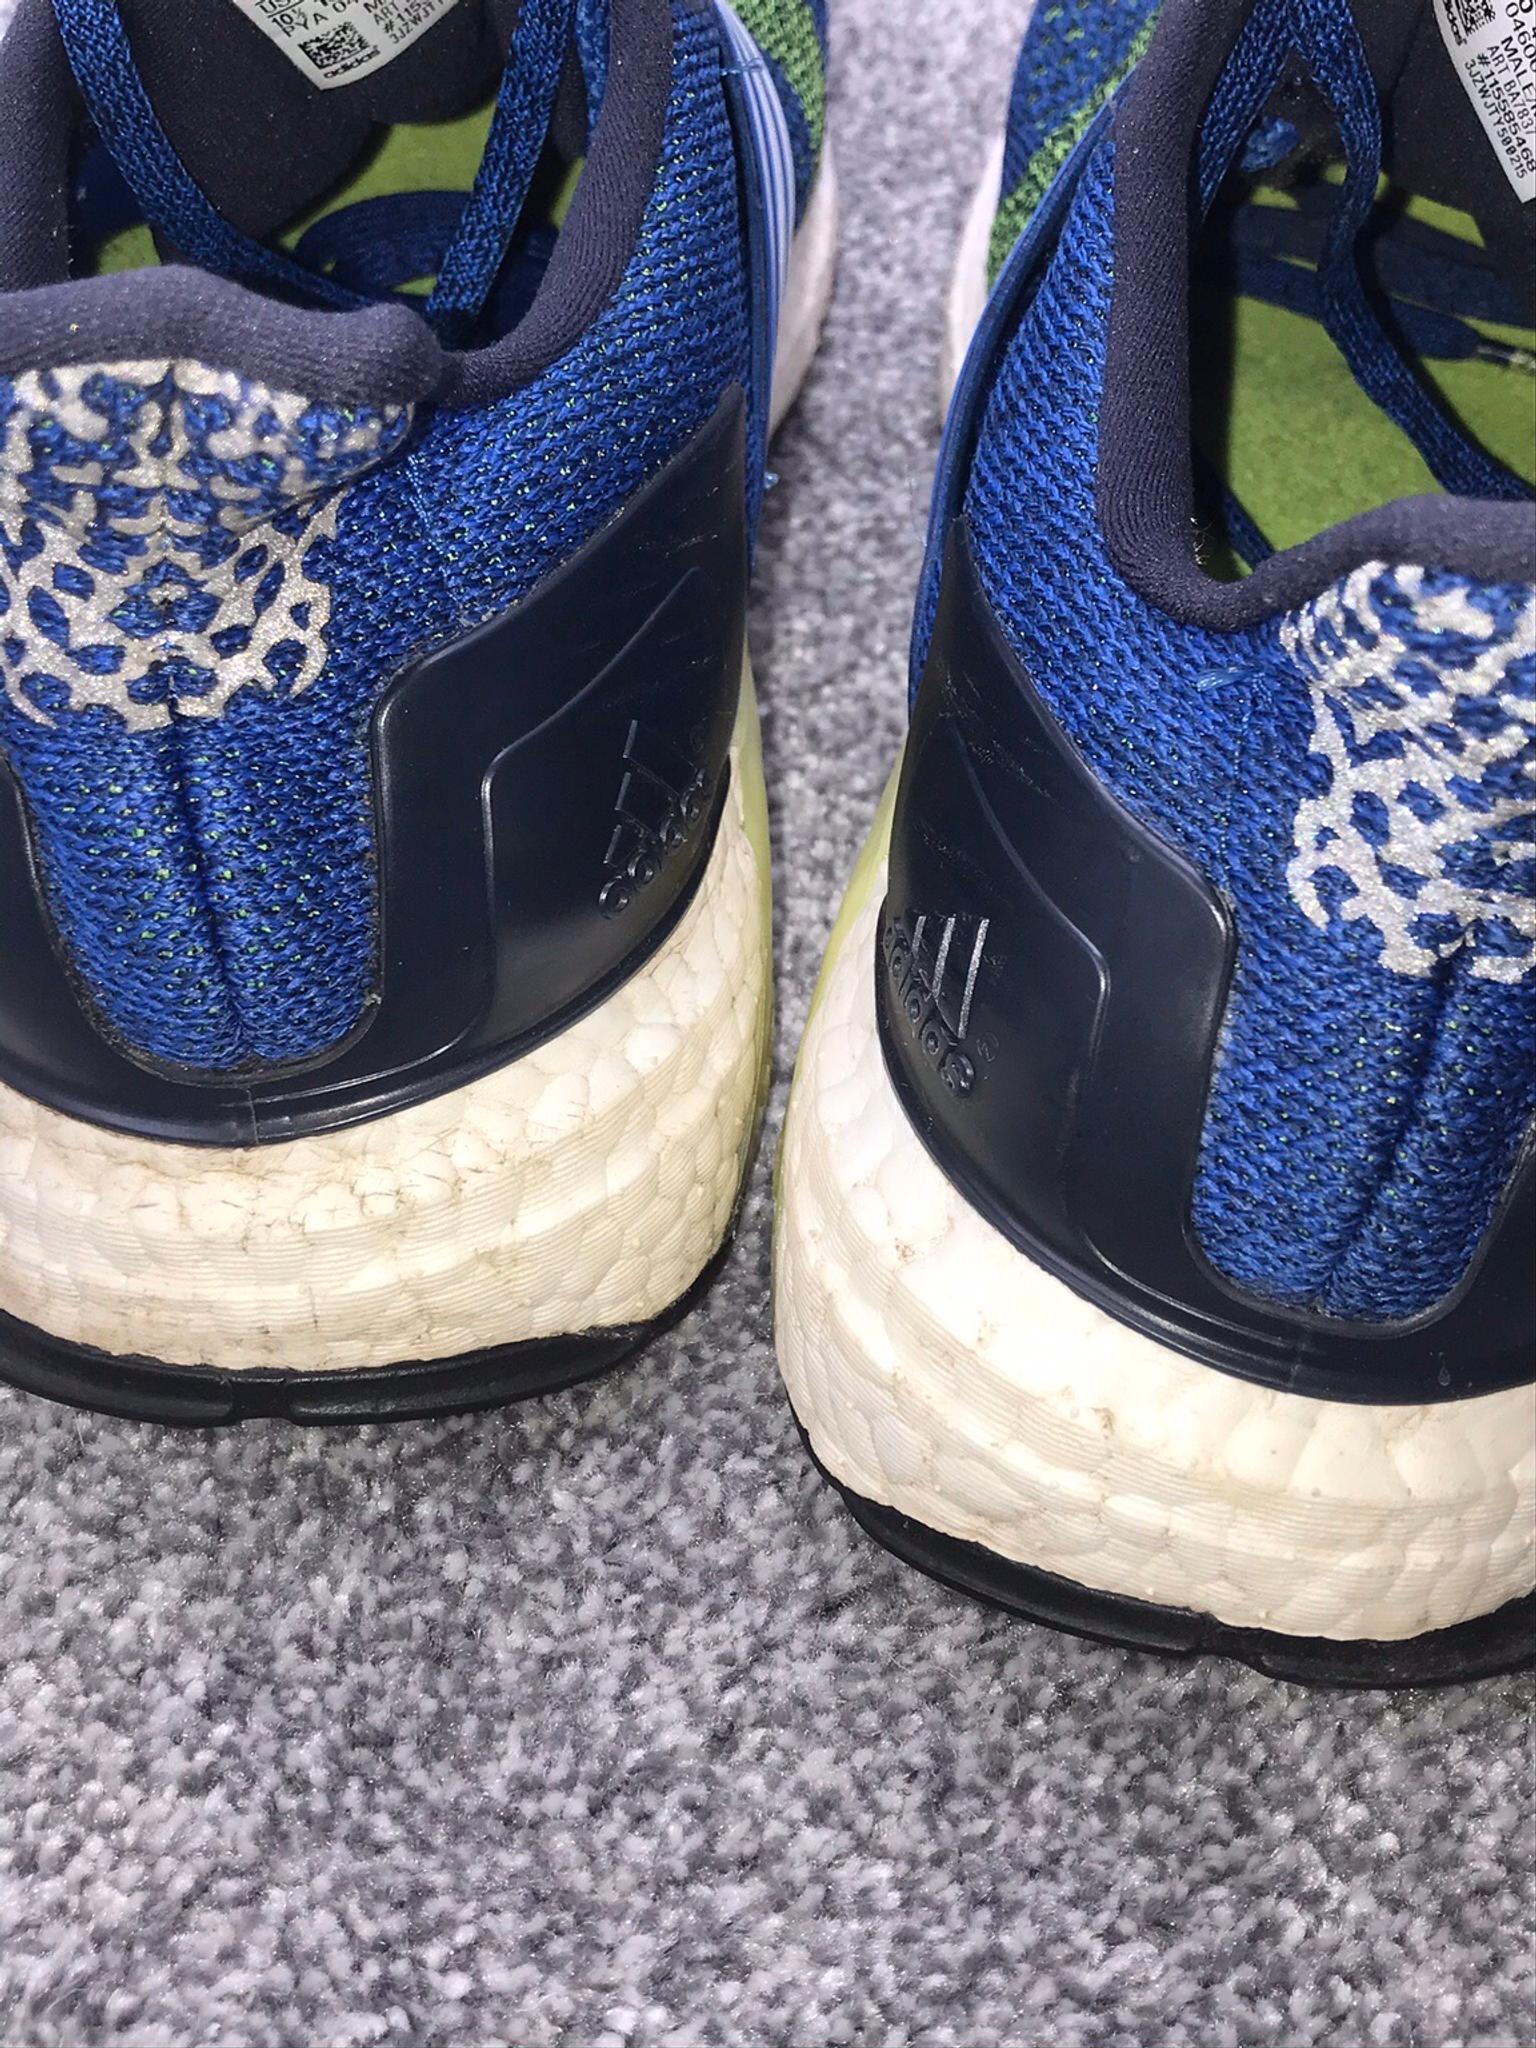 ultra boost size 10